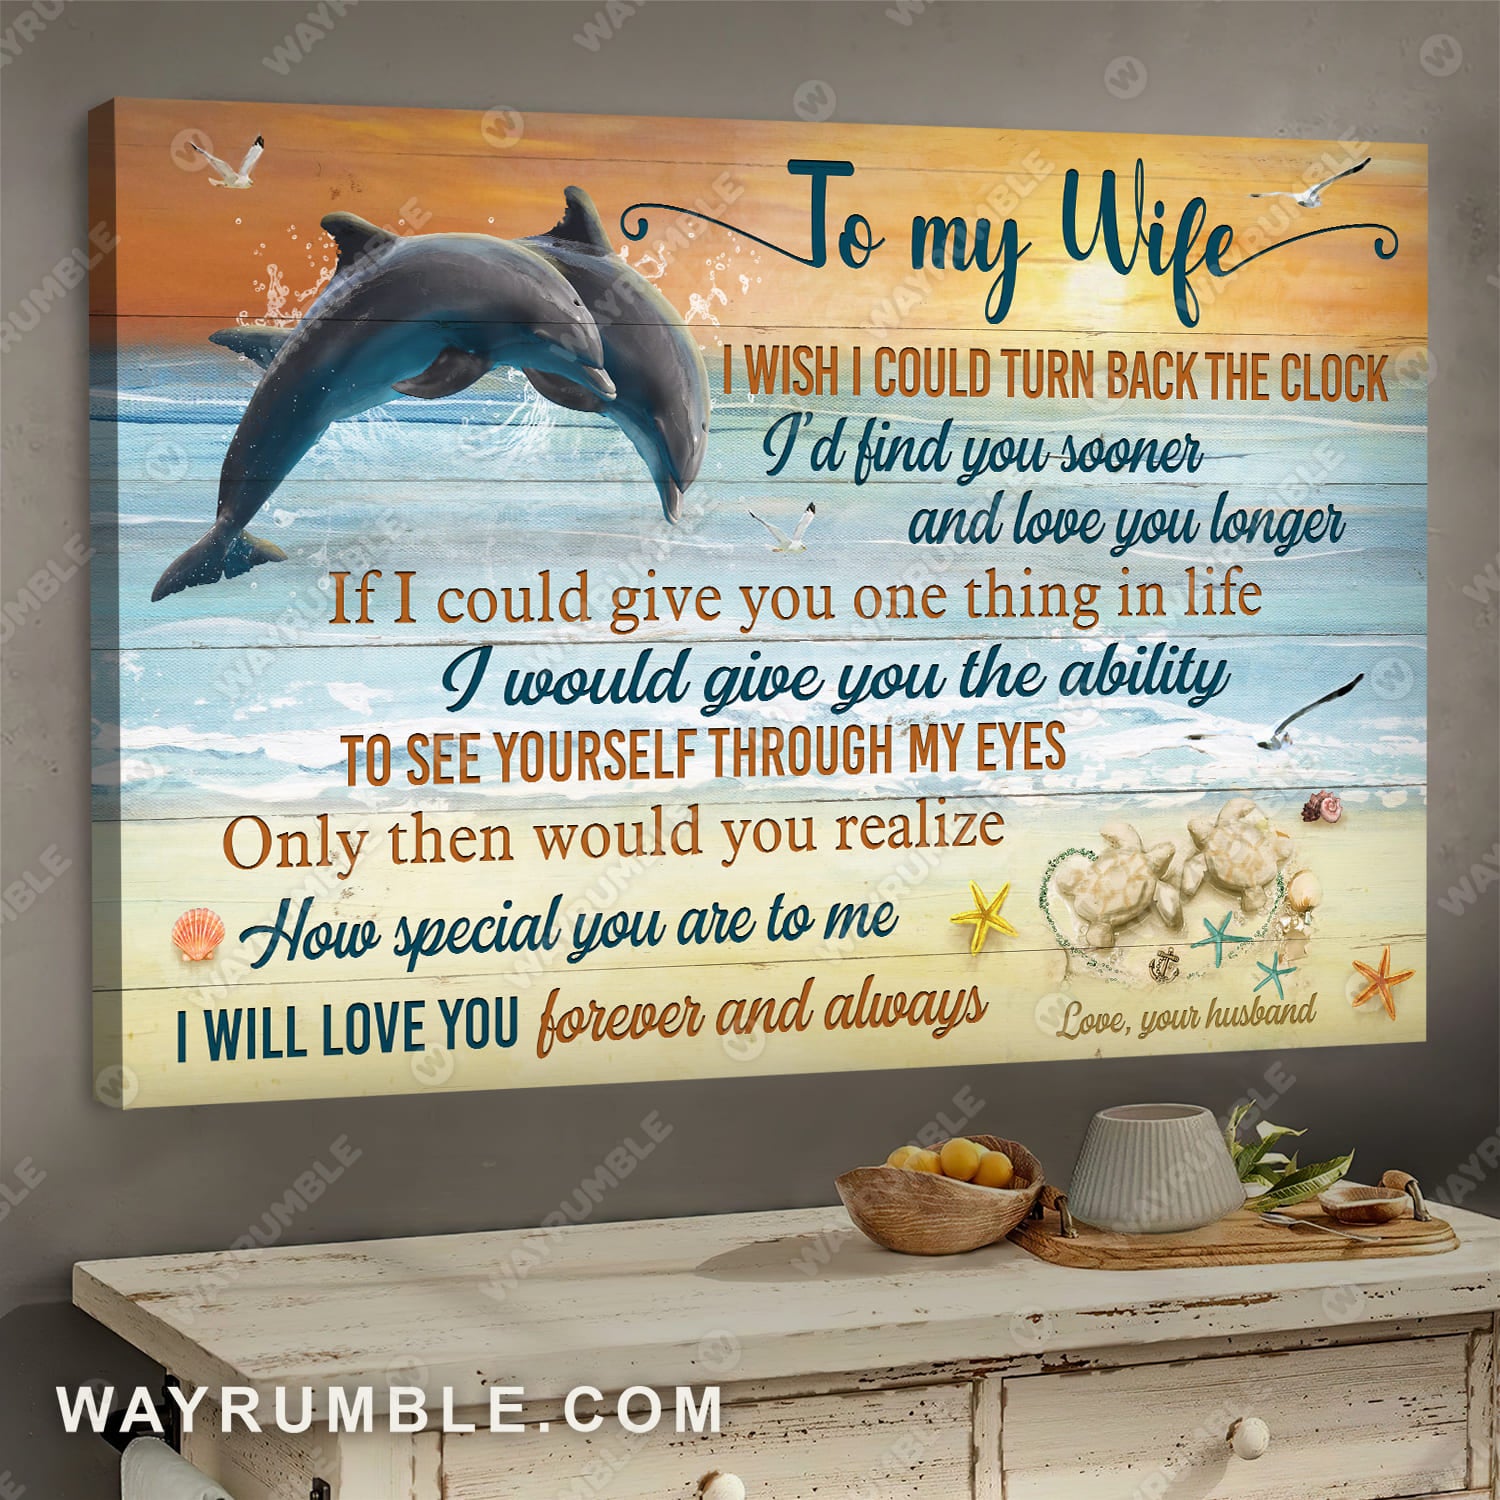 To my wife, Happy dolphin drawing, Little sunshine, I love you forever and always - Couple Landscape Canvas Prints, Wall Art